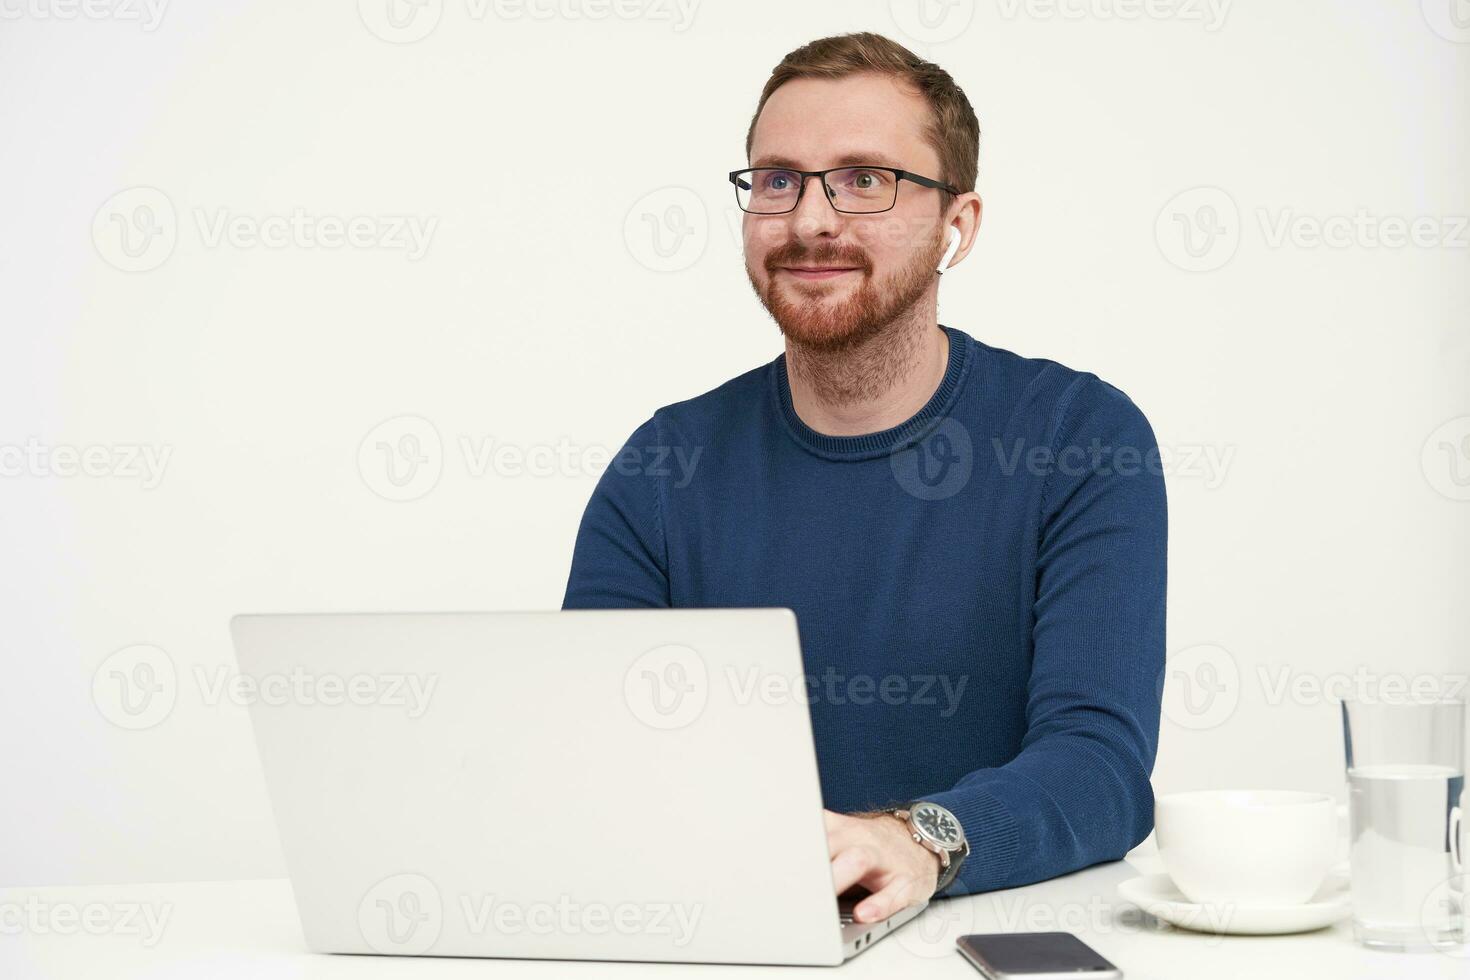 Horizontal shot of young pleased bearded fair-haired man looking positively ahead with lovely smile while keeping hands on keyboard, posing over white background photo